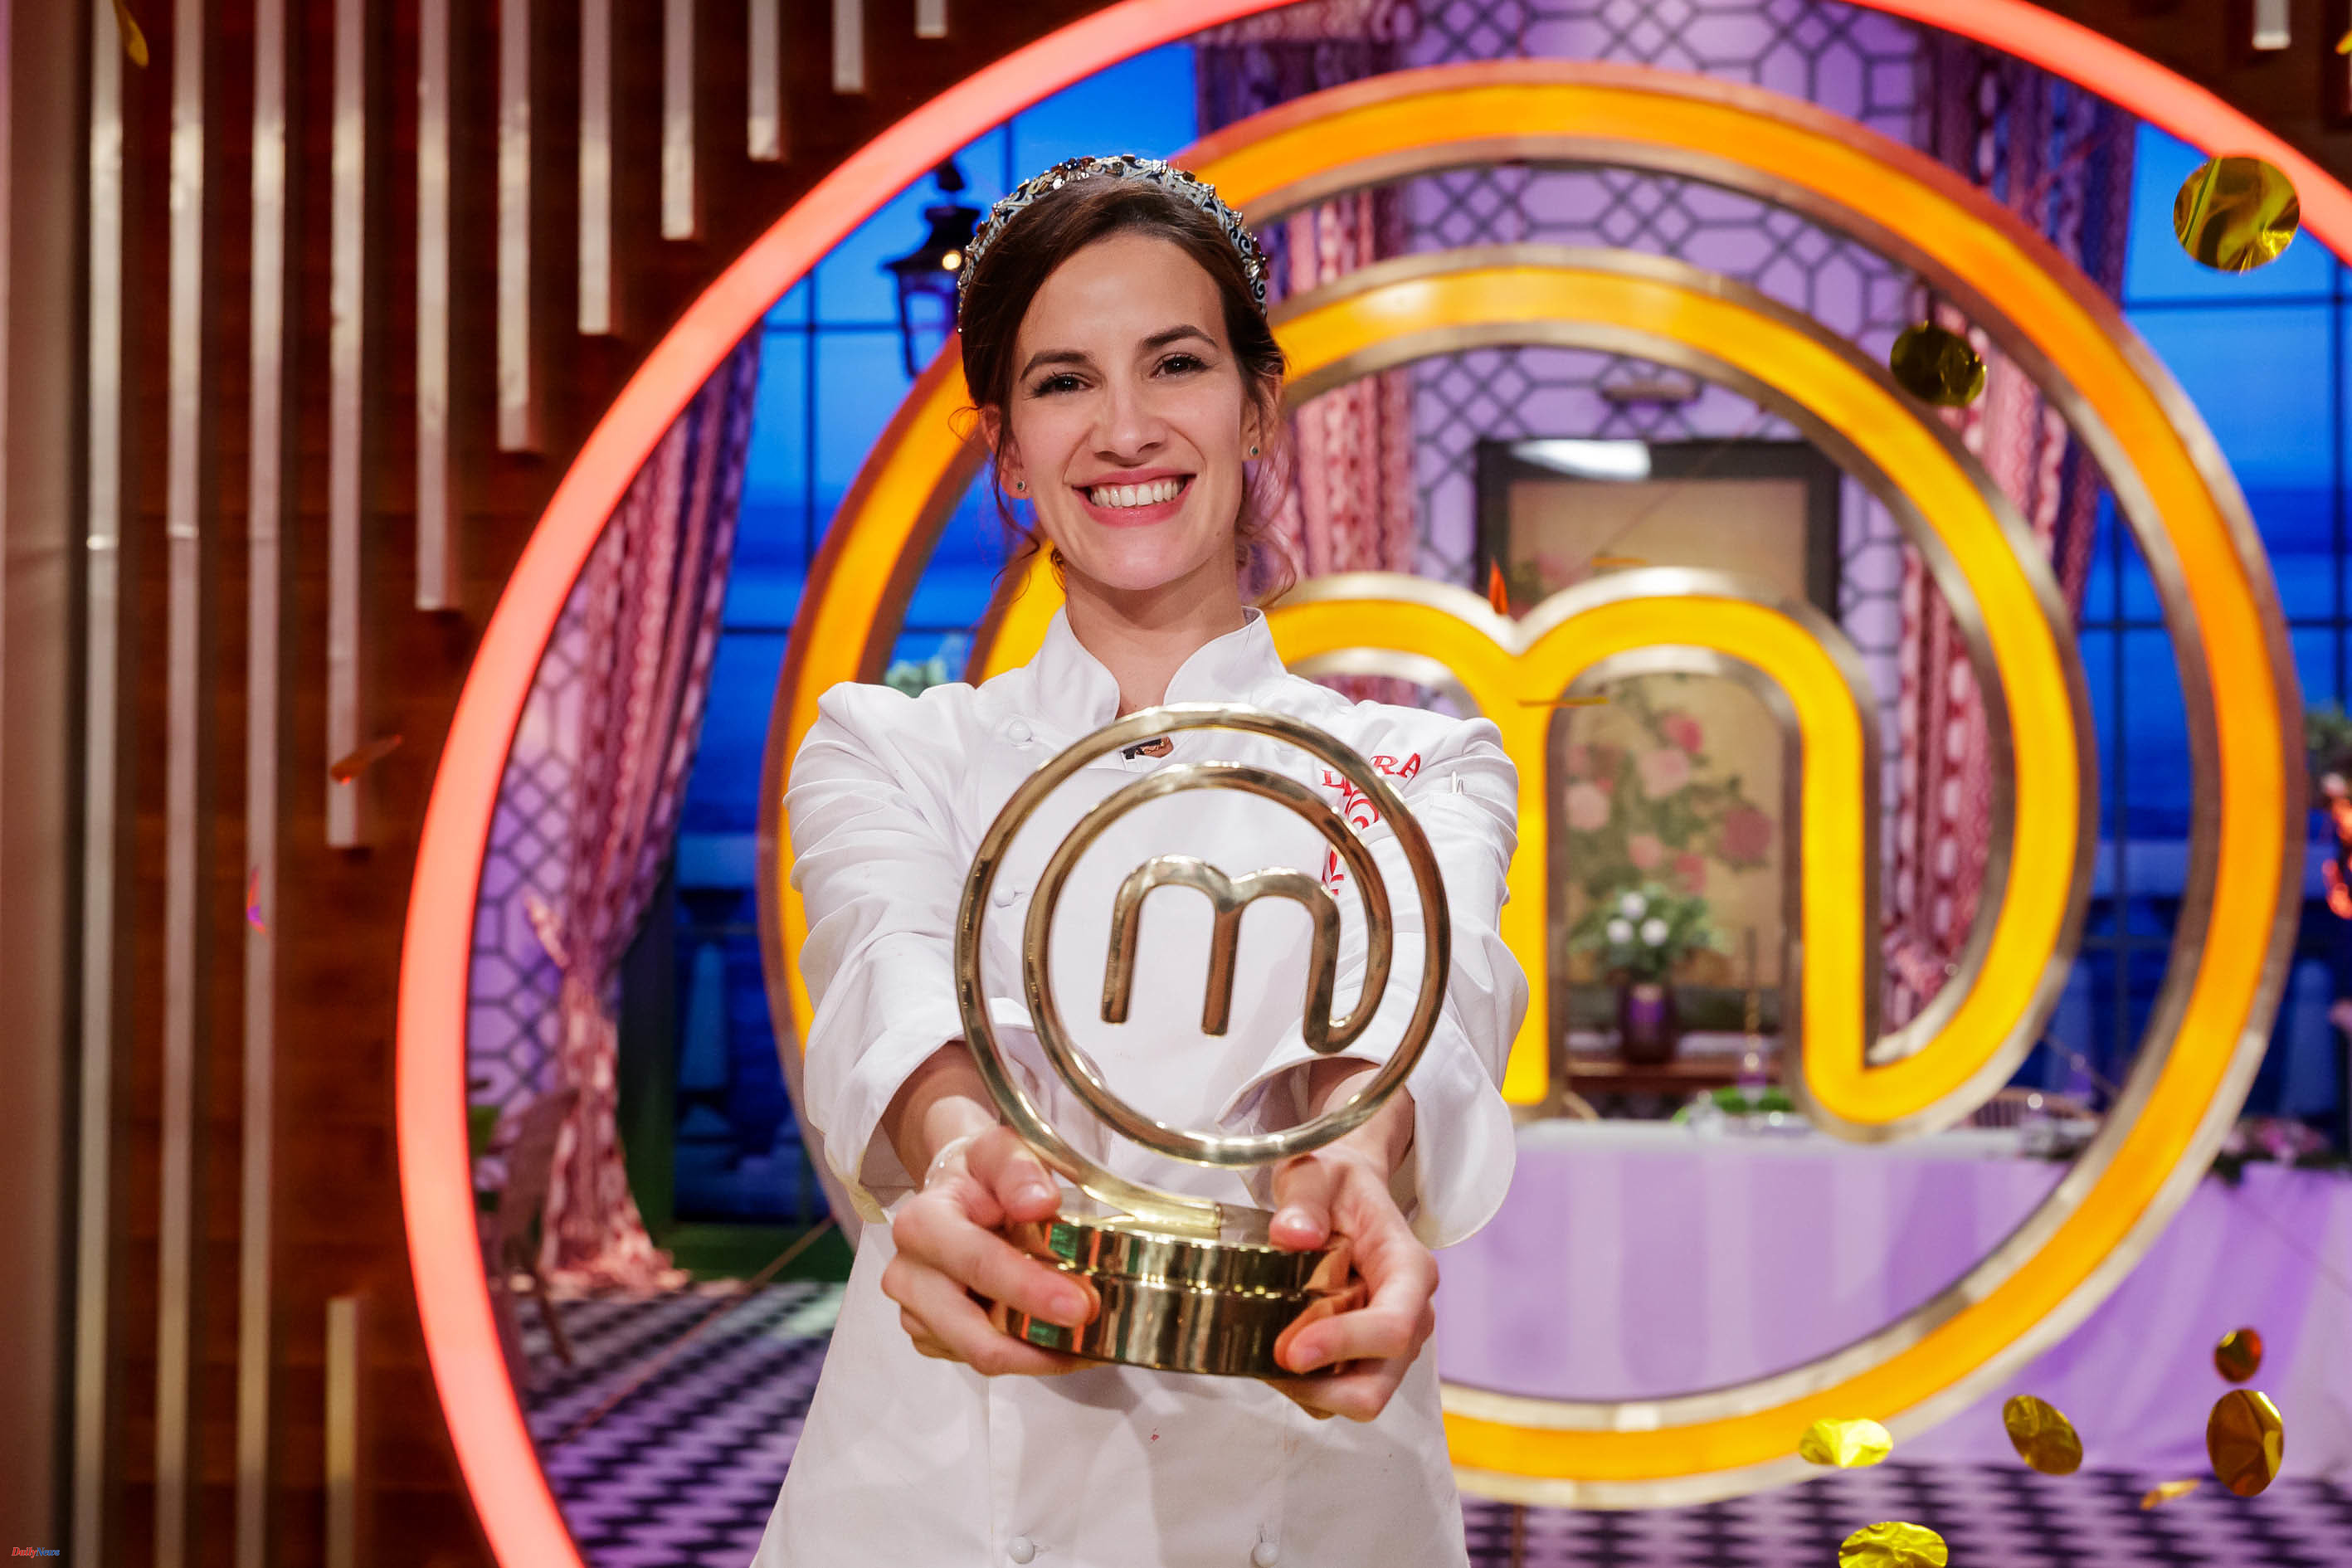 Interview Laura Londoño, the winner of MasterChef Celebrity 8 who left everything for talent: "I had tremendous pressure"